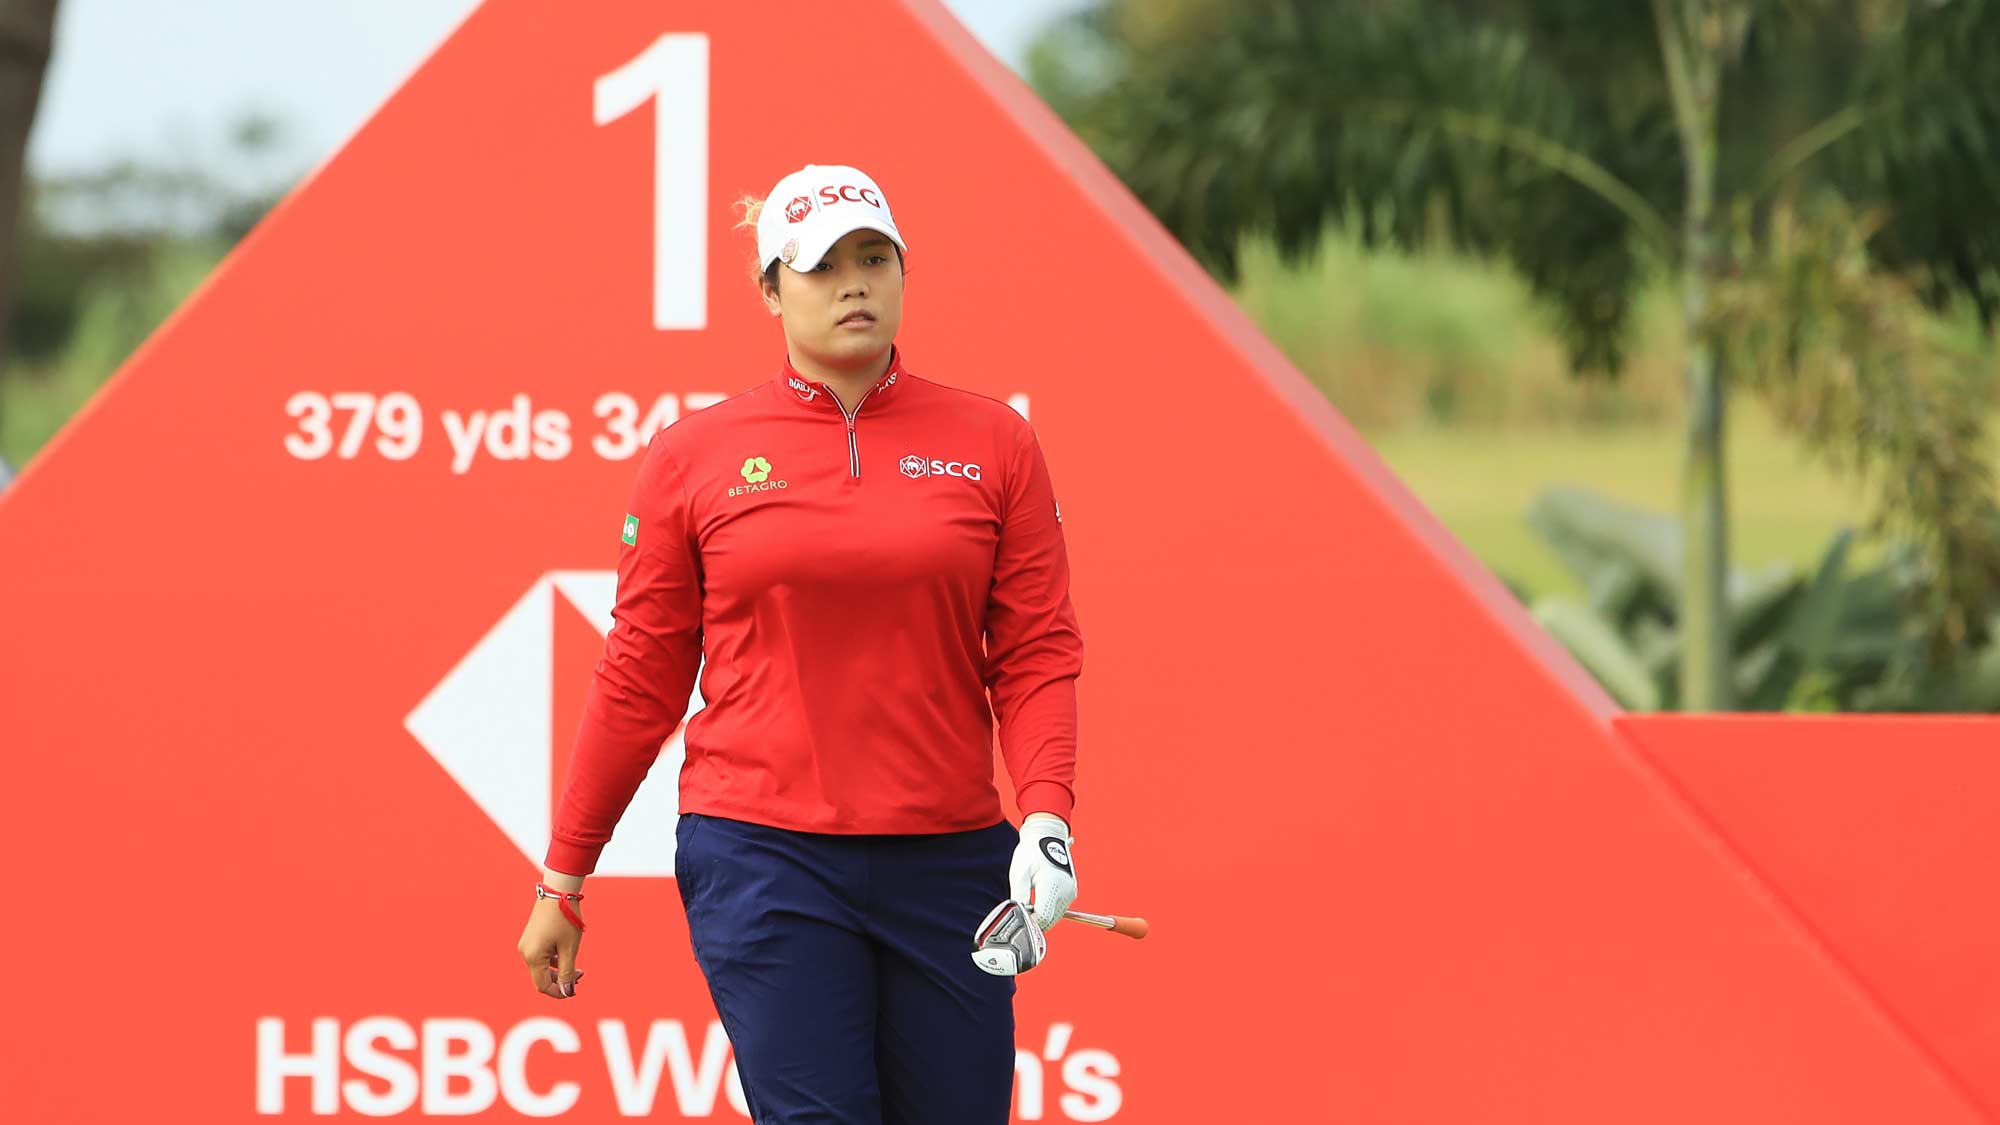 Ariya Jutanugarn of Thailand walks from the first tee during the third round of the HSBC Women's World Championship at Sentosa Golf Club on March 02, 2019 in Singapore.